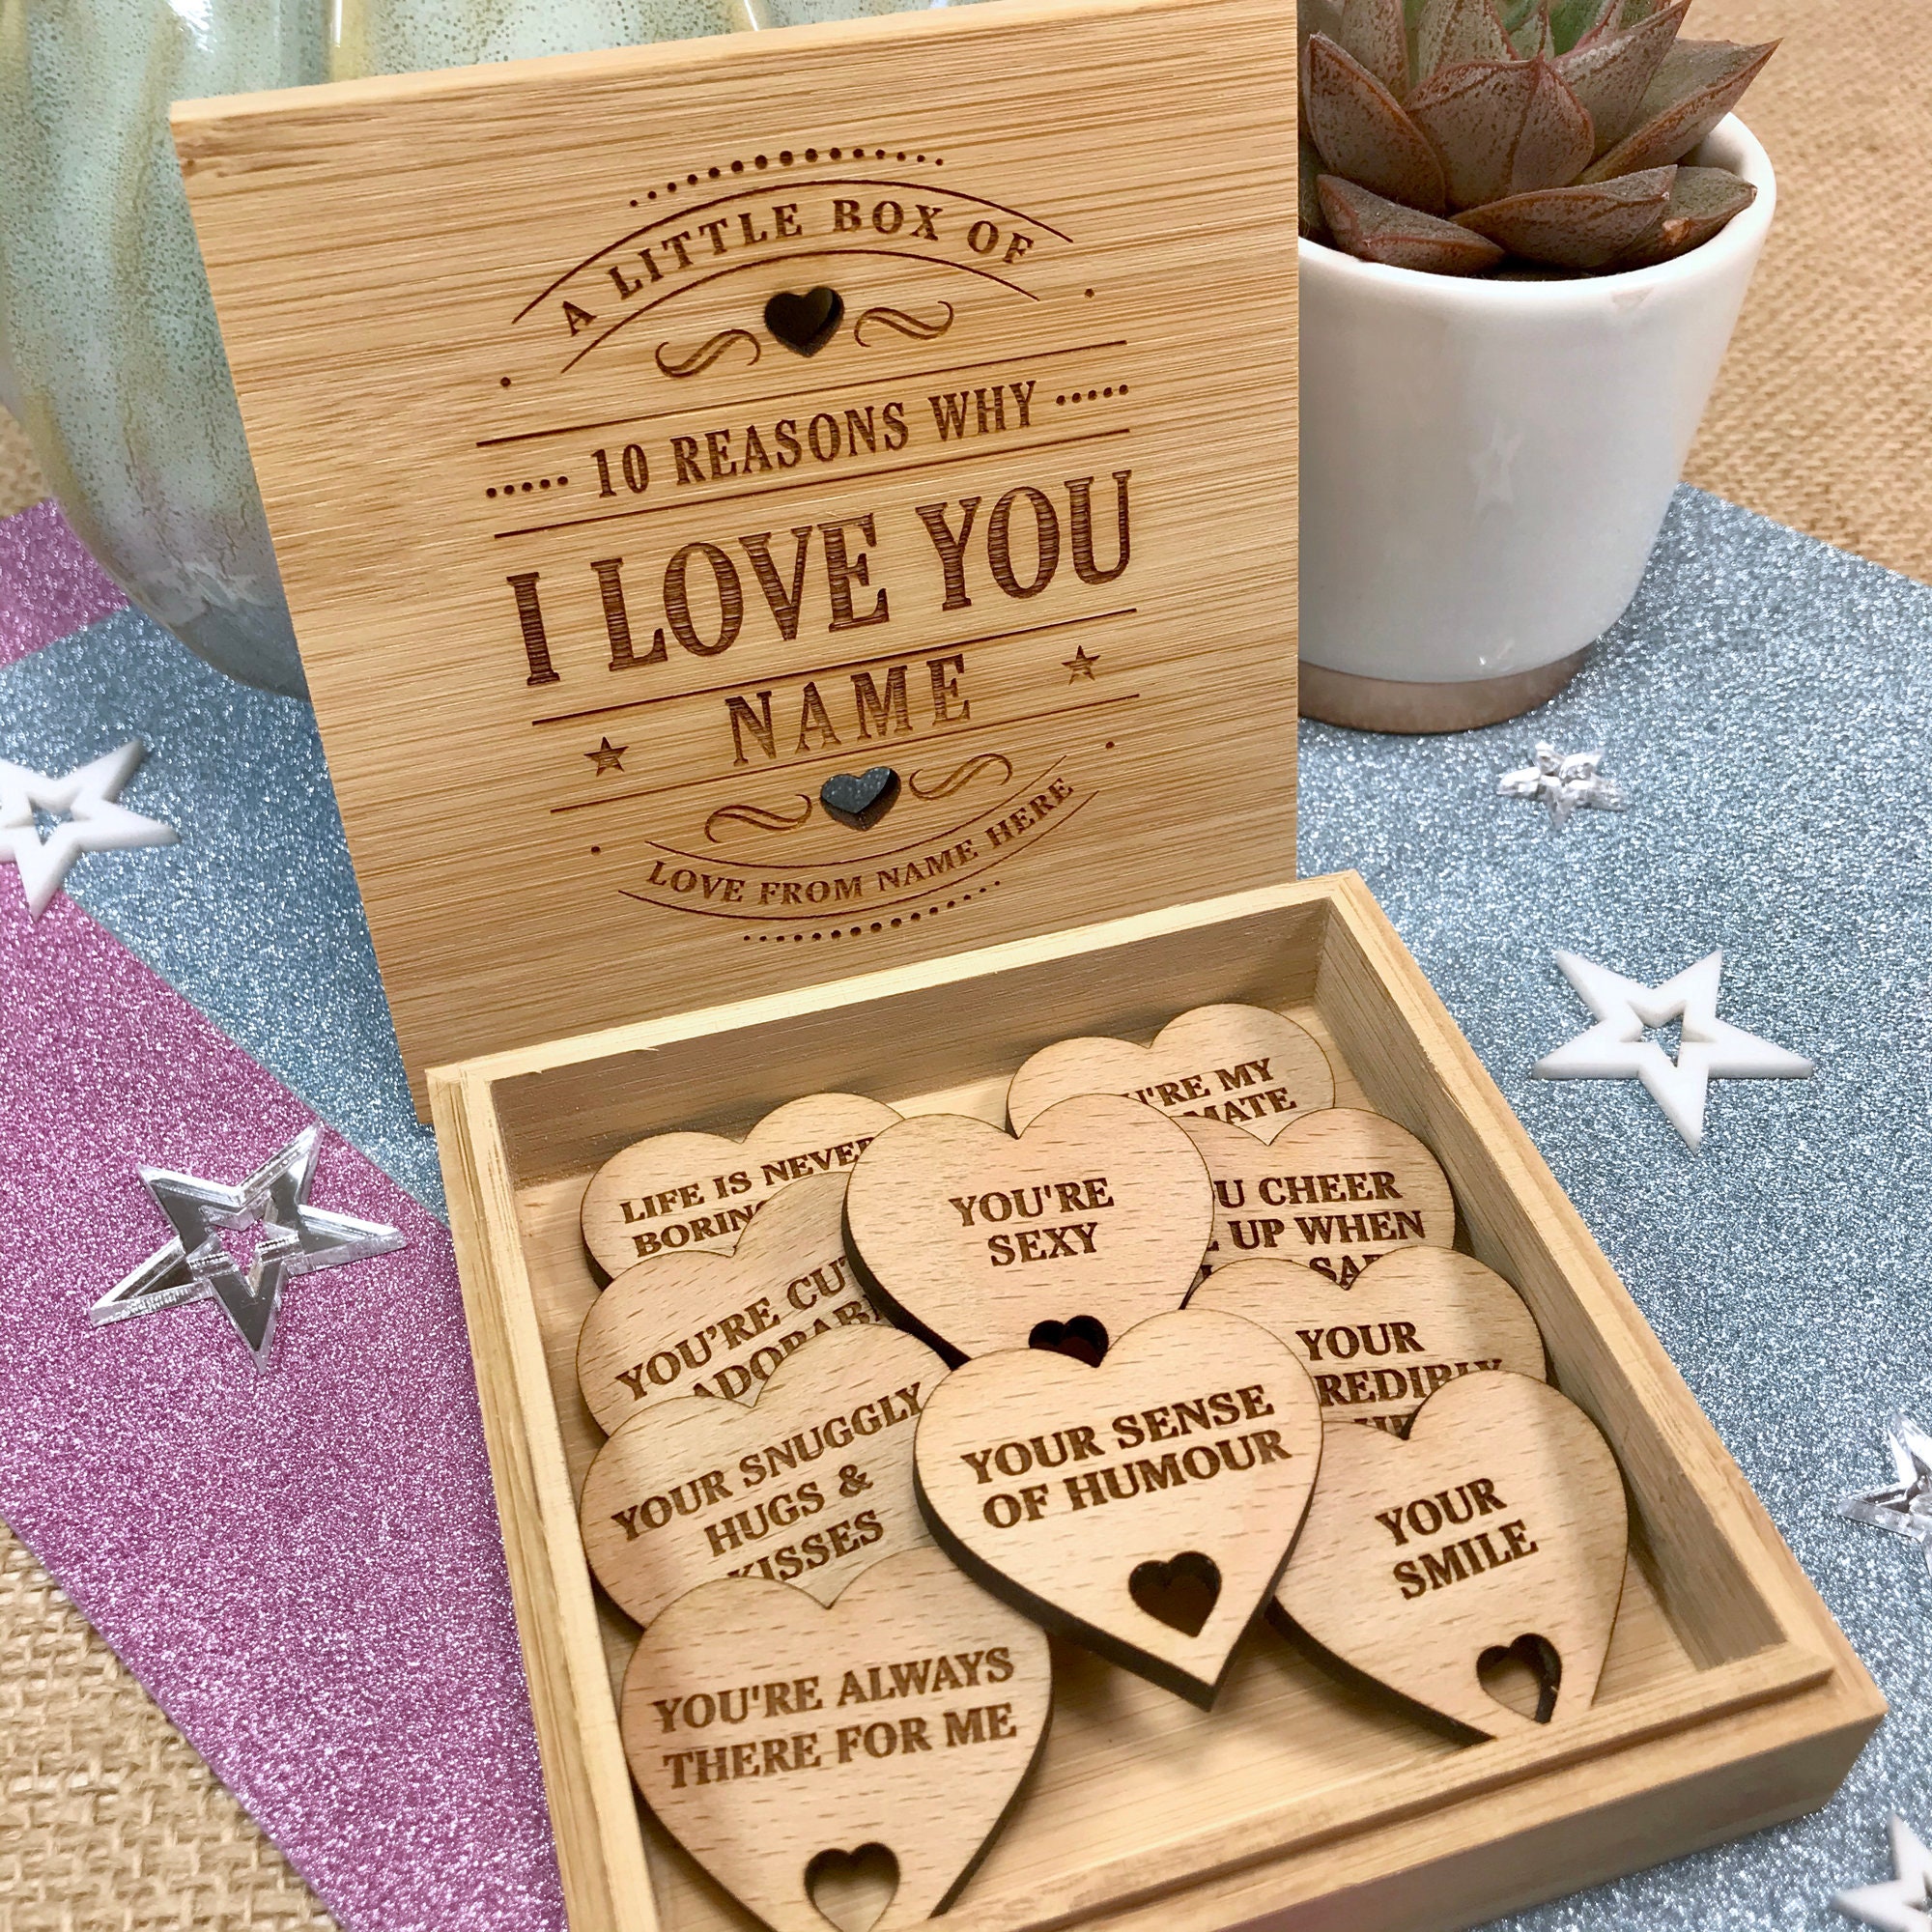 10 Reasons Why I Love You Bamboo Box and Personalised Hearts photo